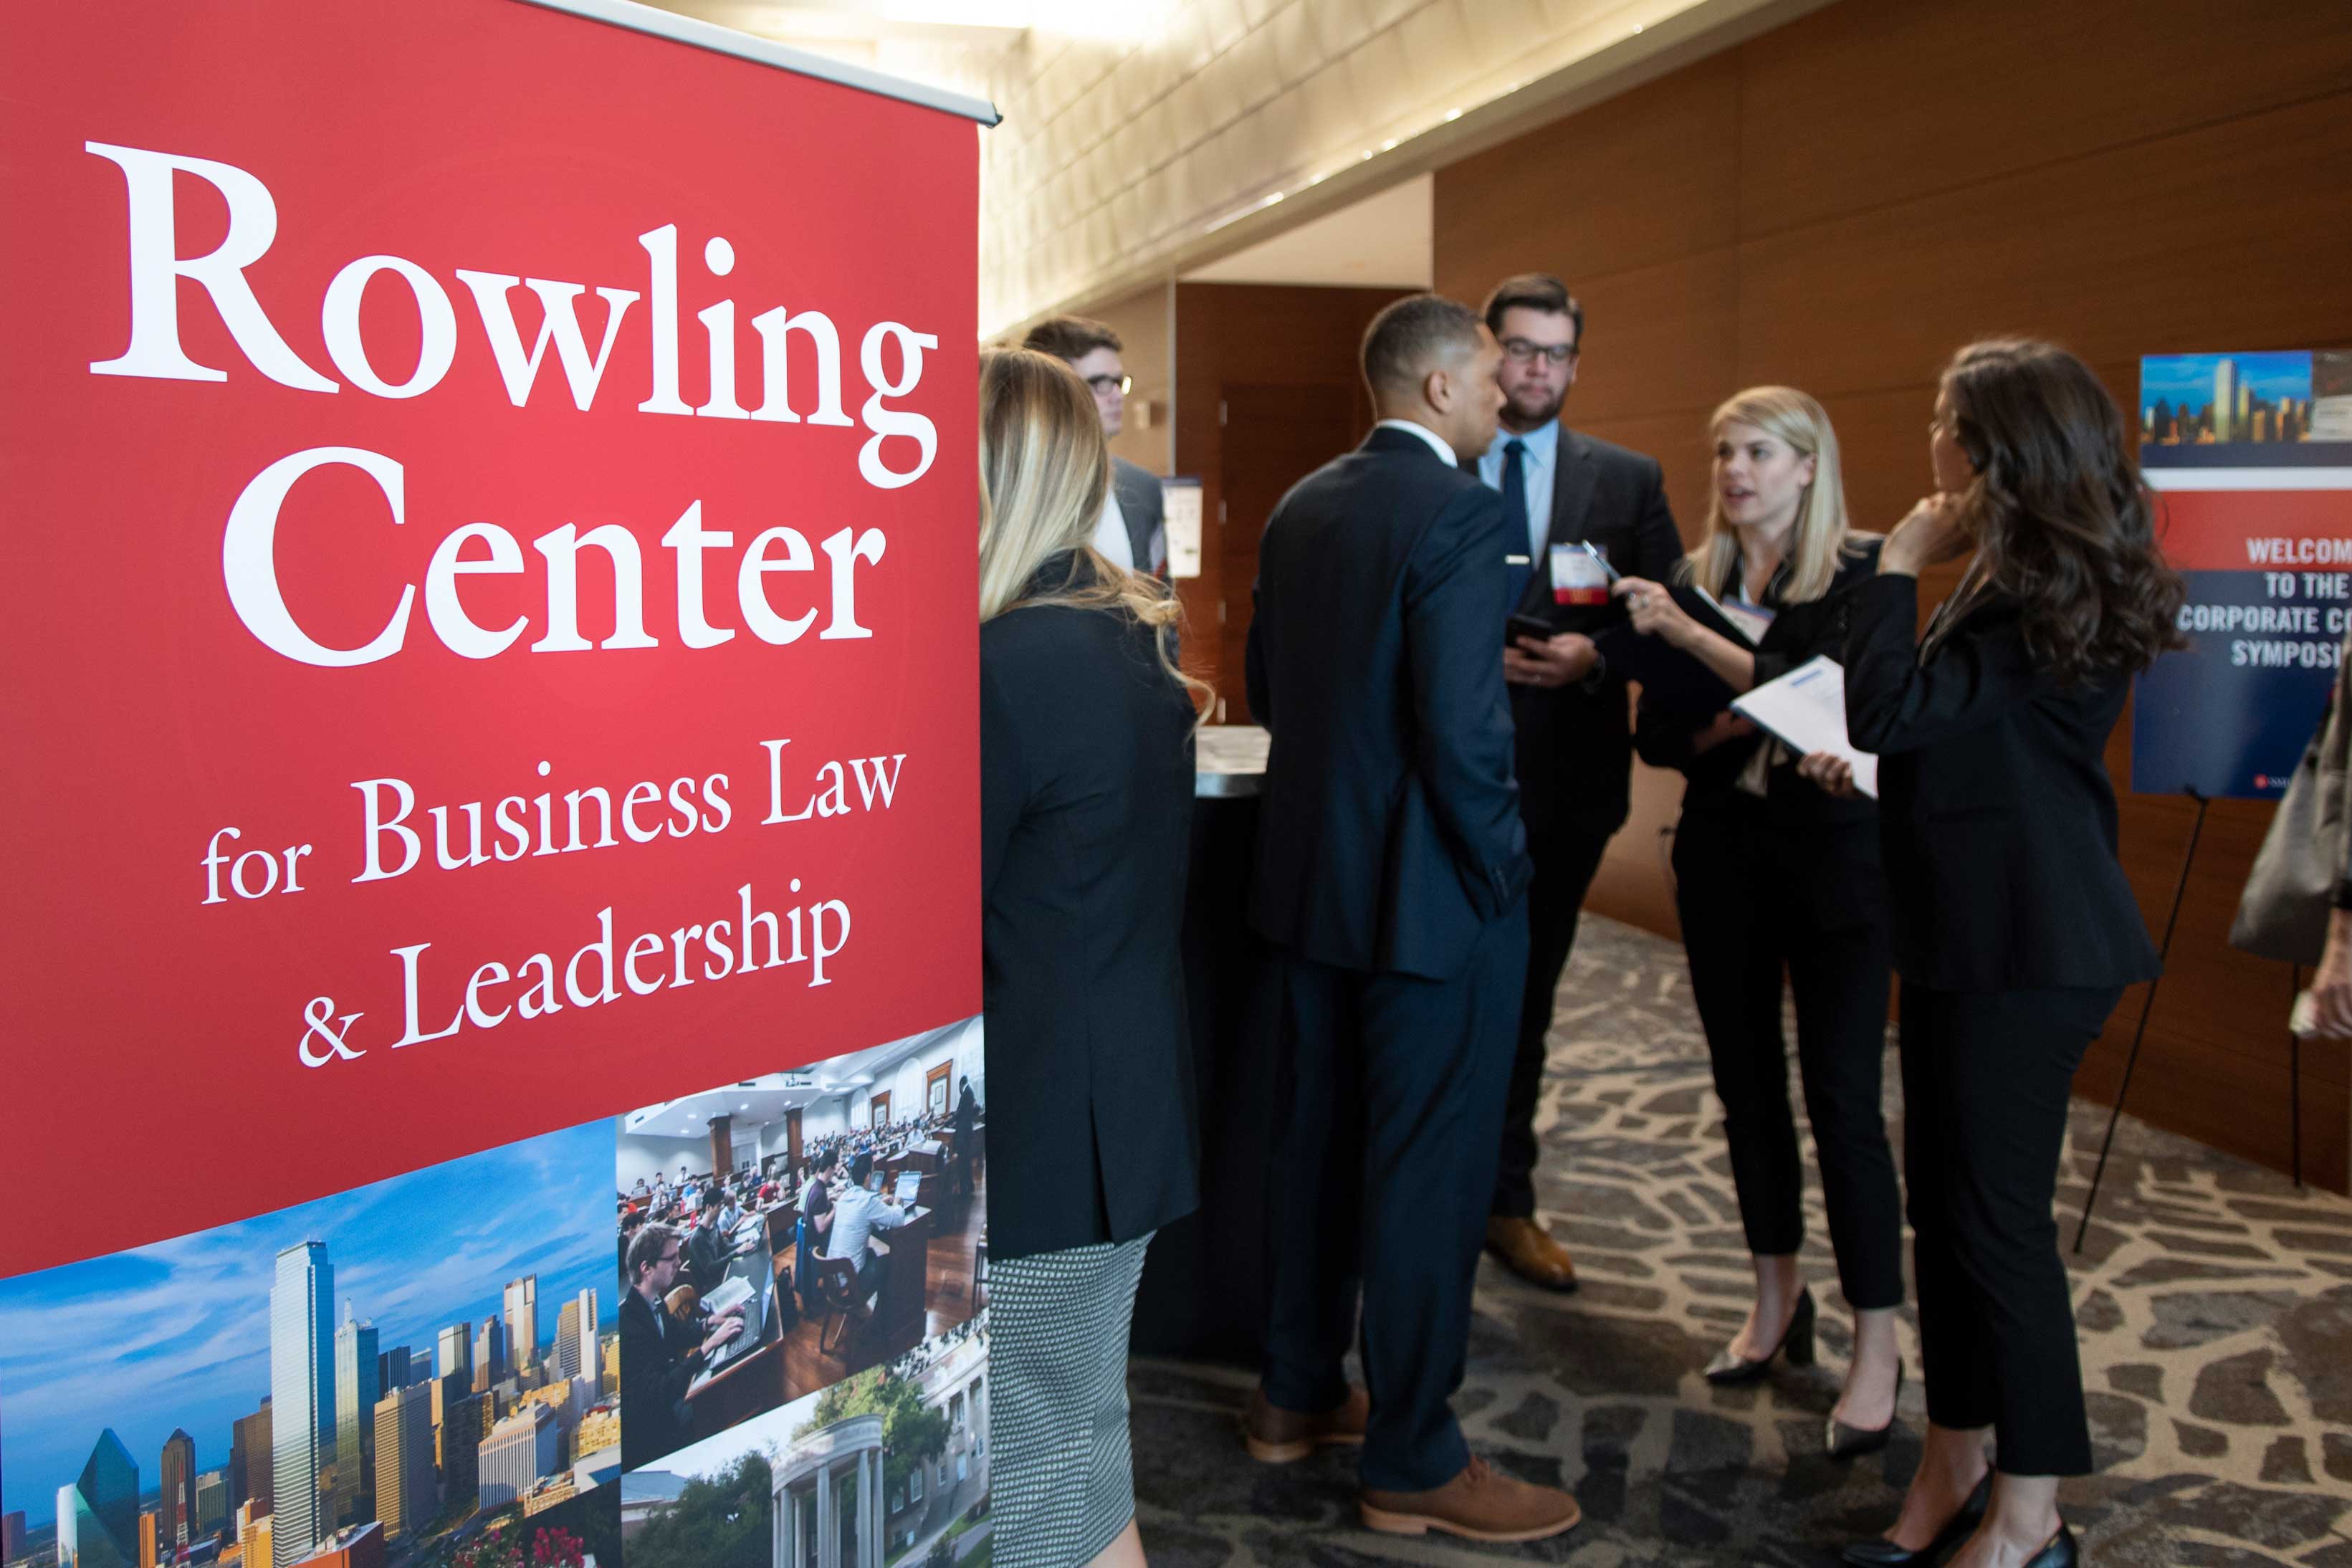 Robert B. Rowling Center for Business Law & Leadership